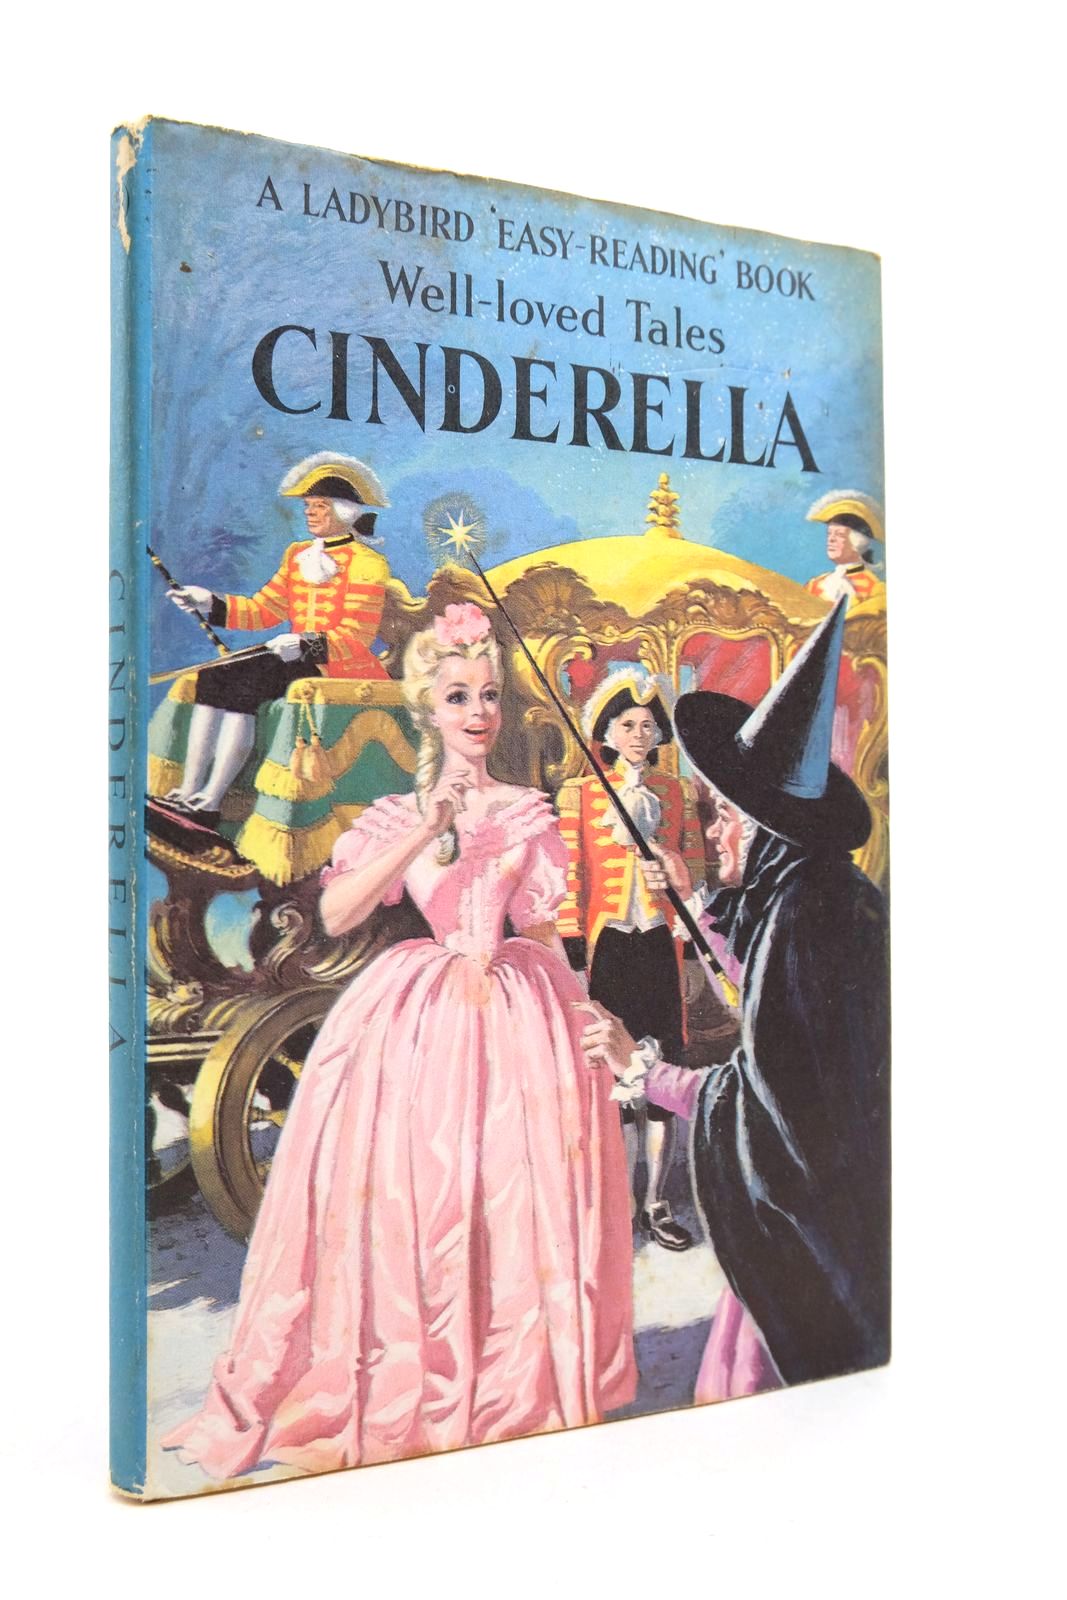 Photo of CINDERELLA written by Southgate, Vera illustrated by Winter, Eric published by Wills &amp; Hepworth Ltd. (STOCK CODE: 2140210)  for sale by Stella & Rose's Books